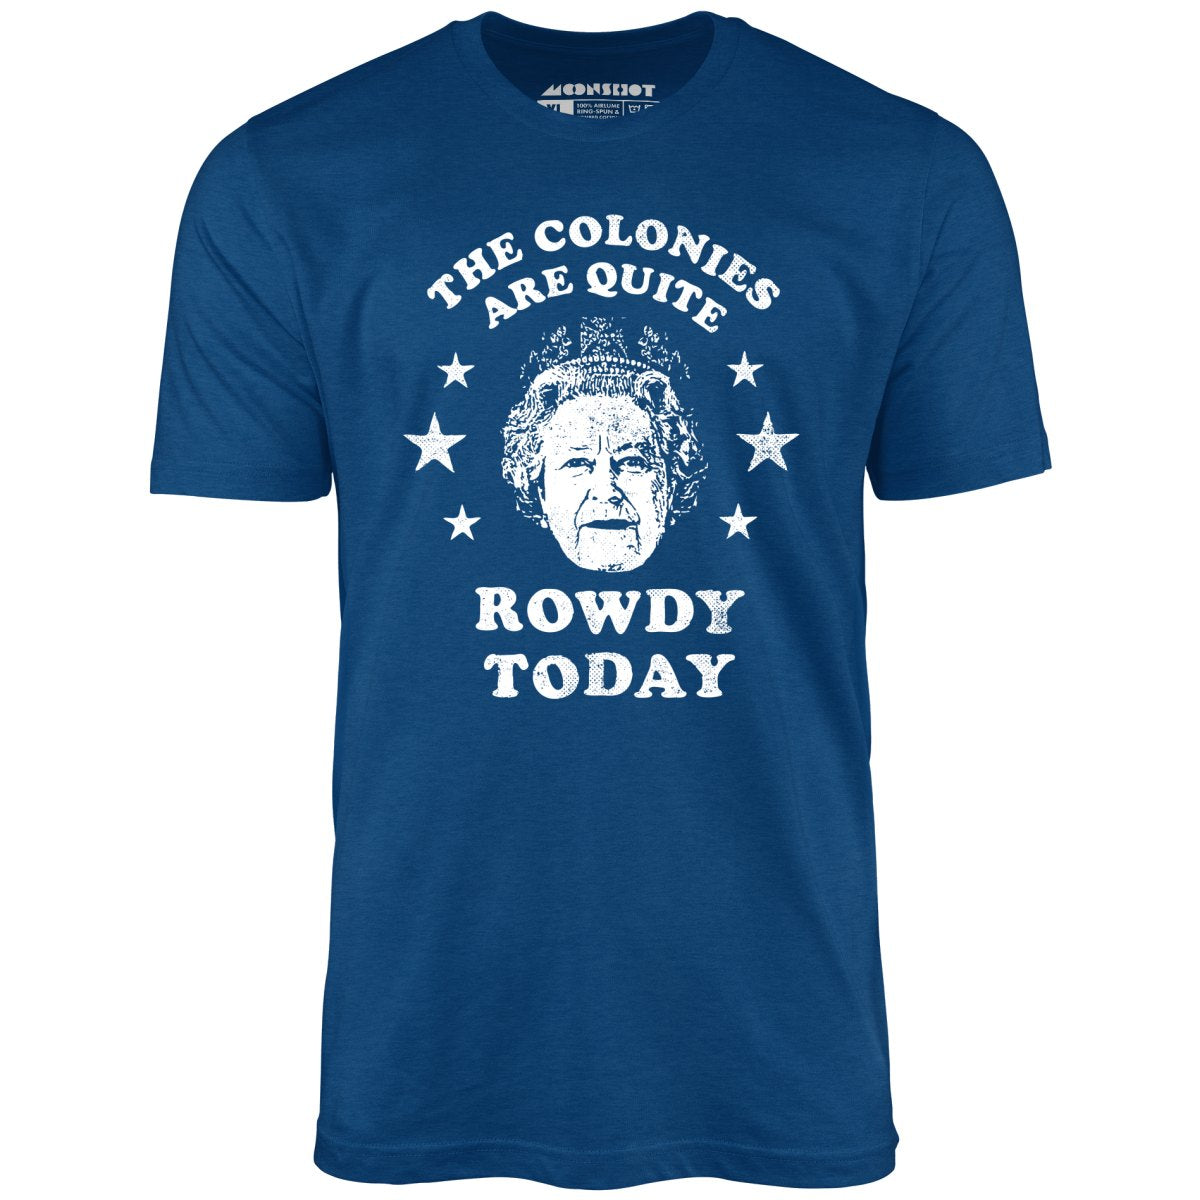 The Colonies Are Quite Rowdy Today - Unisex T-Shirt